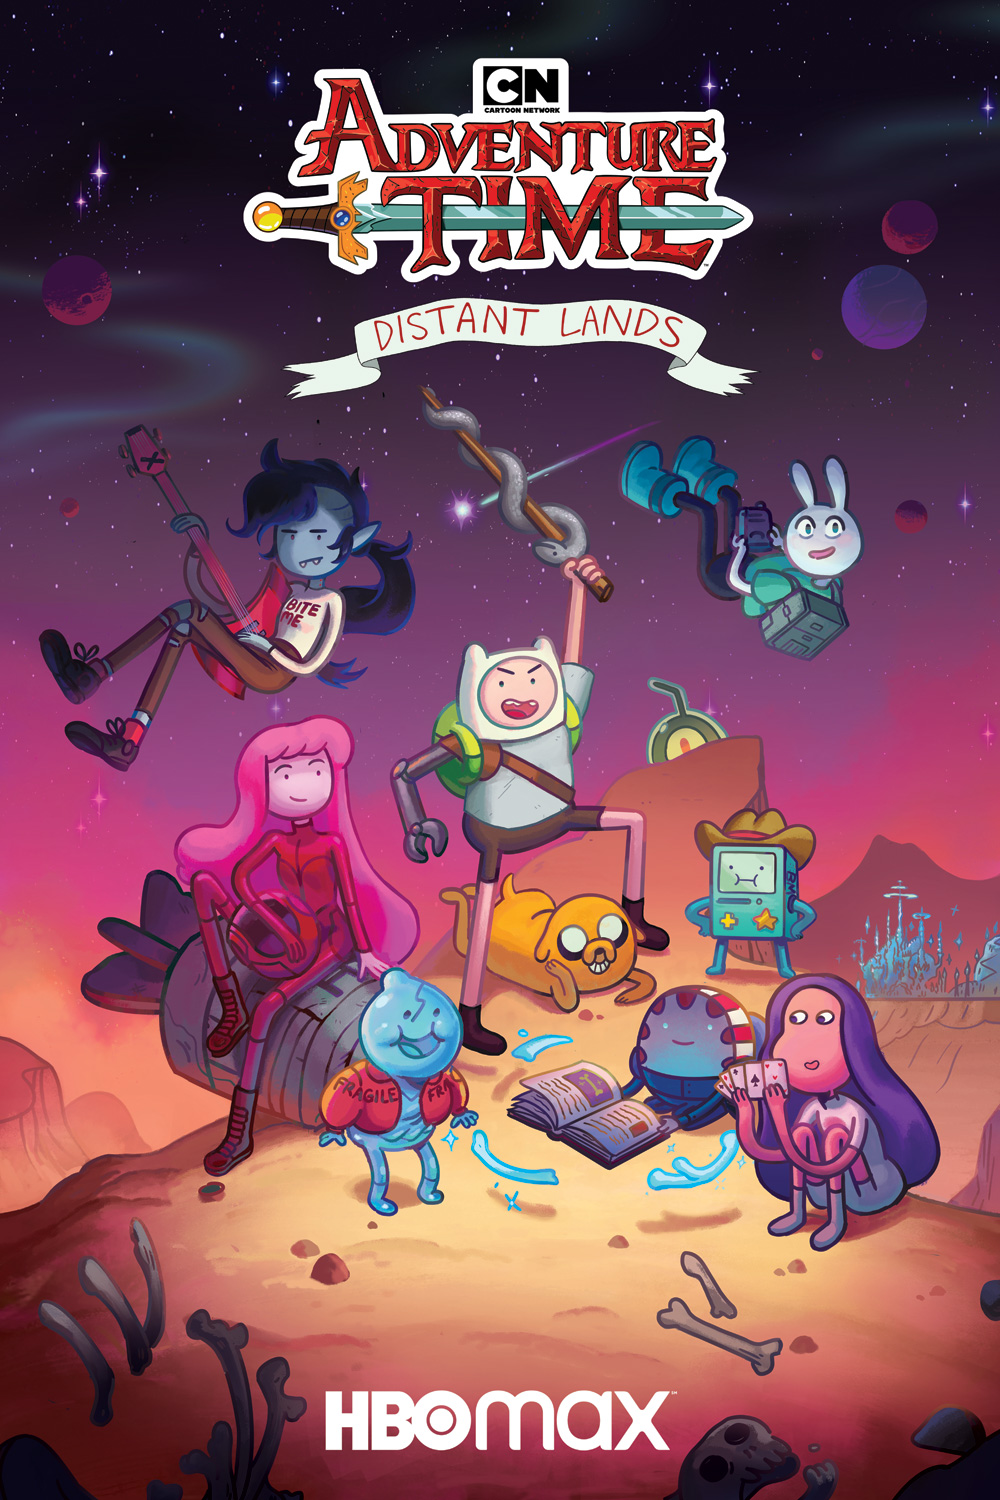 Adventure Time Distant Lands The Adventure Time Wiki. Mathematical!